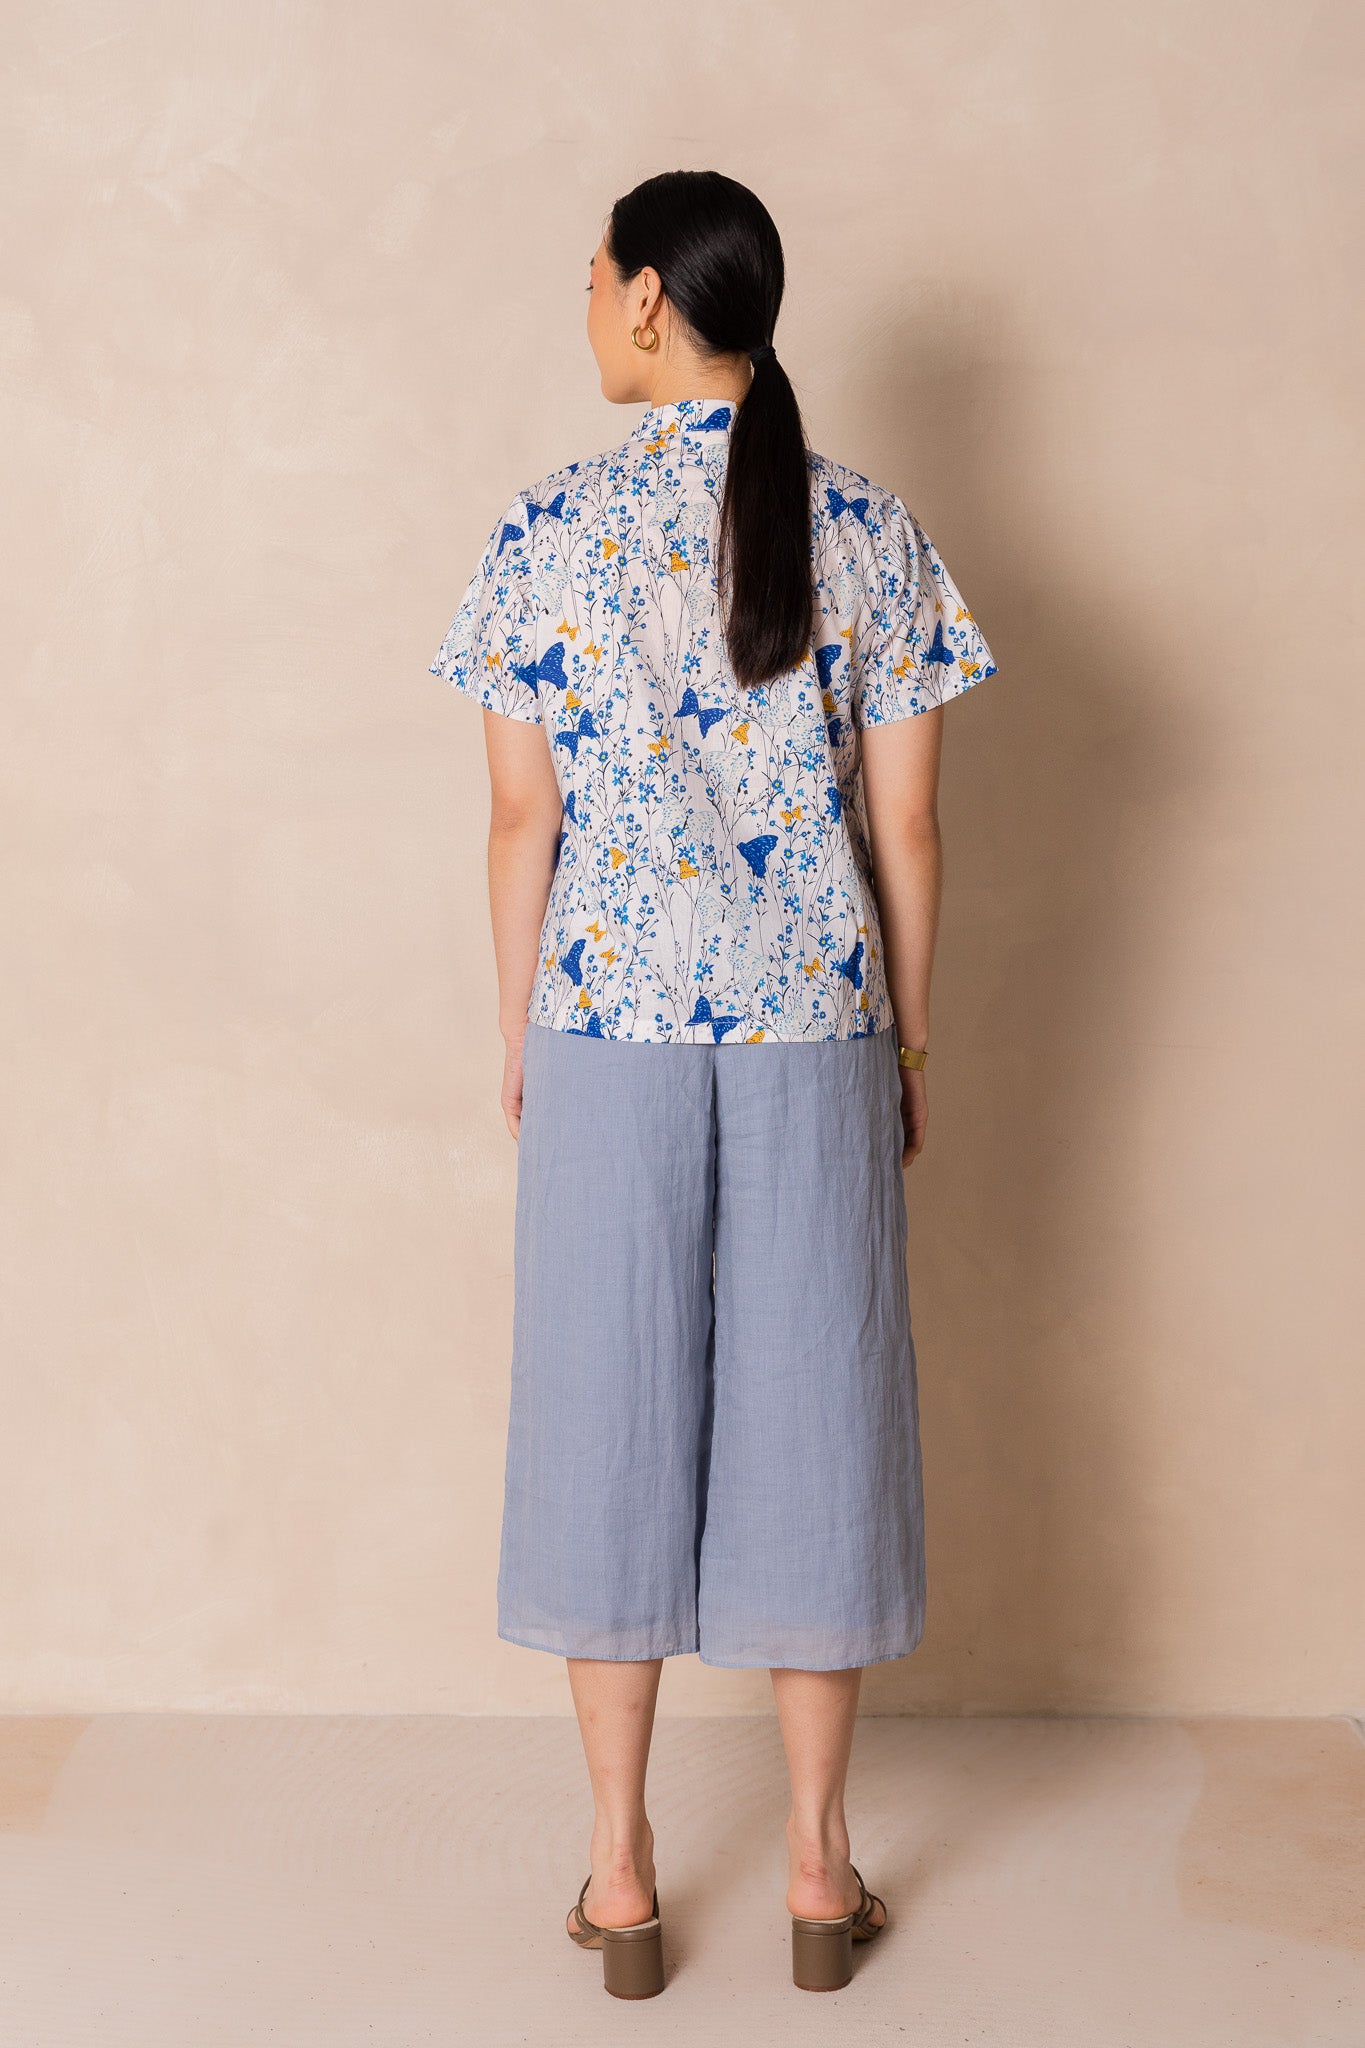 Butterfly Print Short Sleeve Cheongsam Top, available on You Living